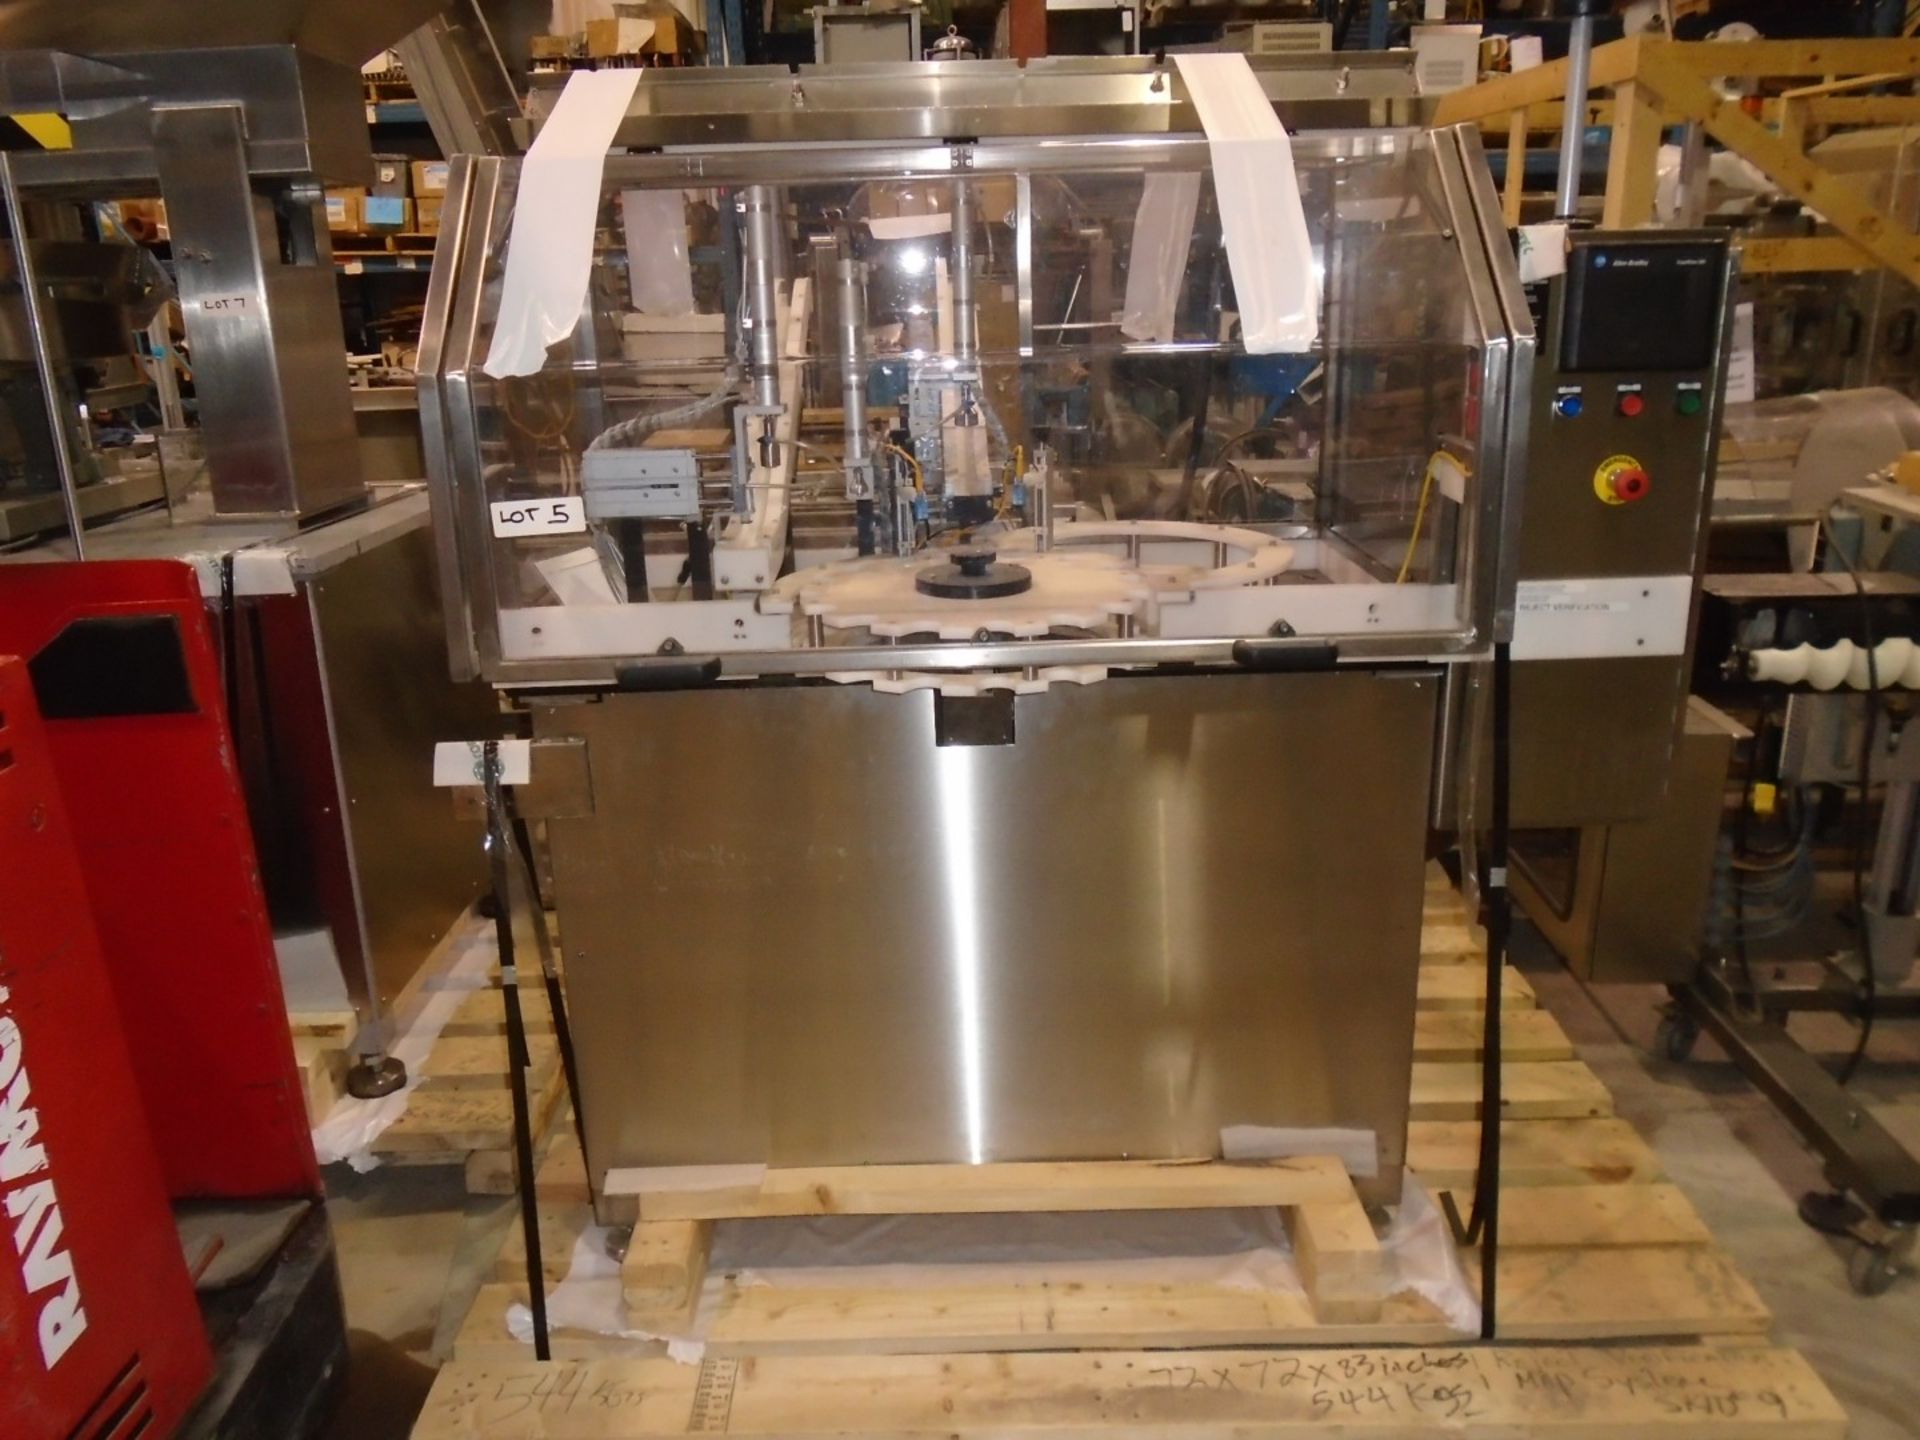 NEW/NEVER USED INTEGRATED PACKAGING SERVICES PUMP AND CAP PLACER, 208V/3PH/60HZ, BUILT IN 2011,